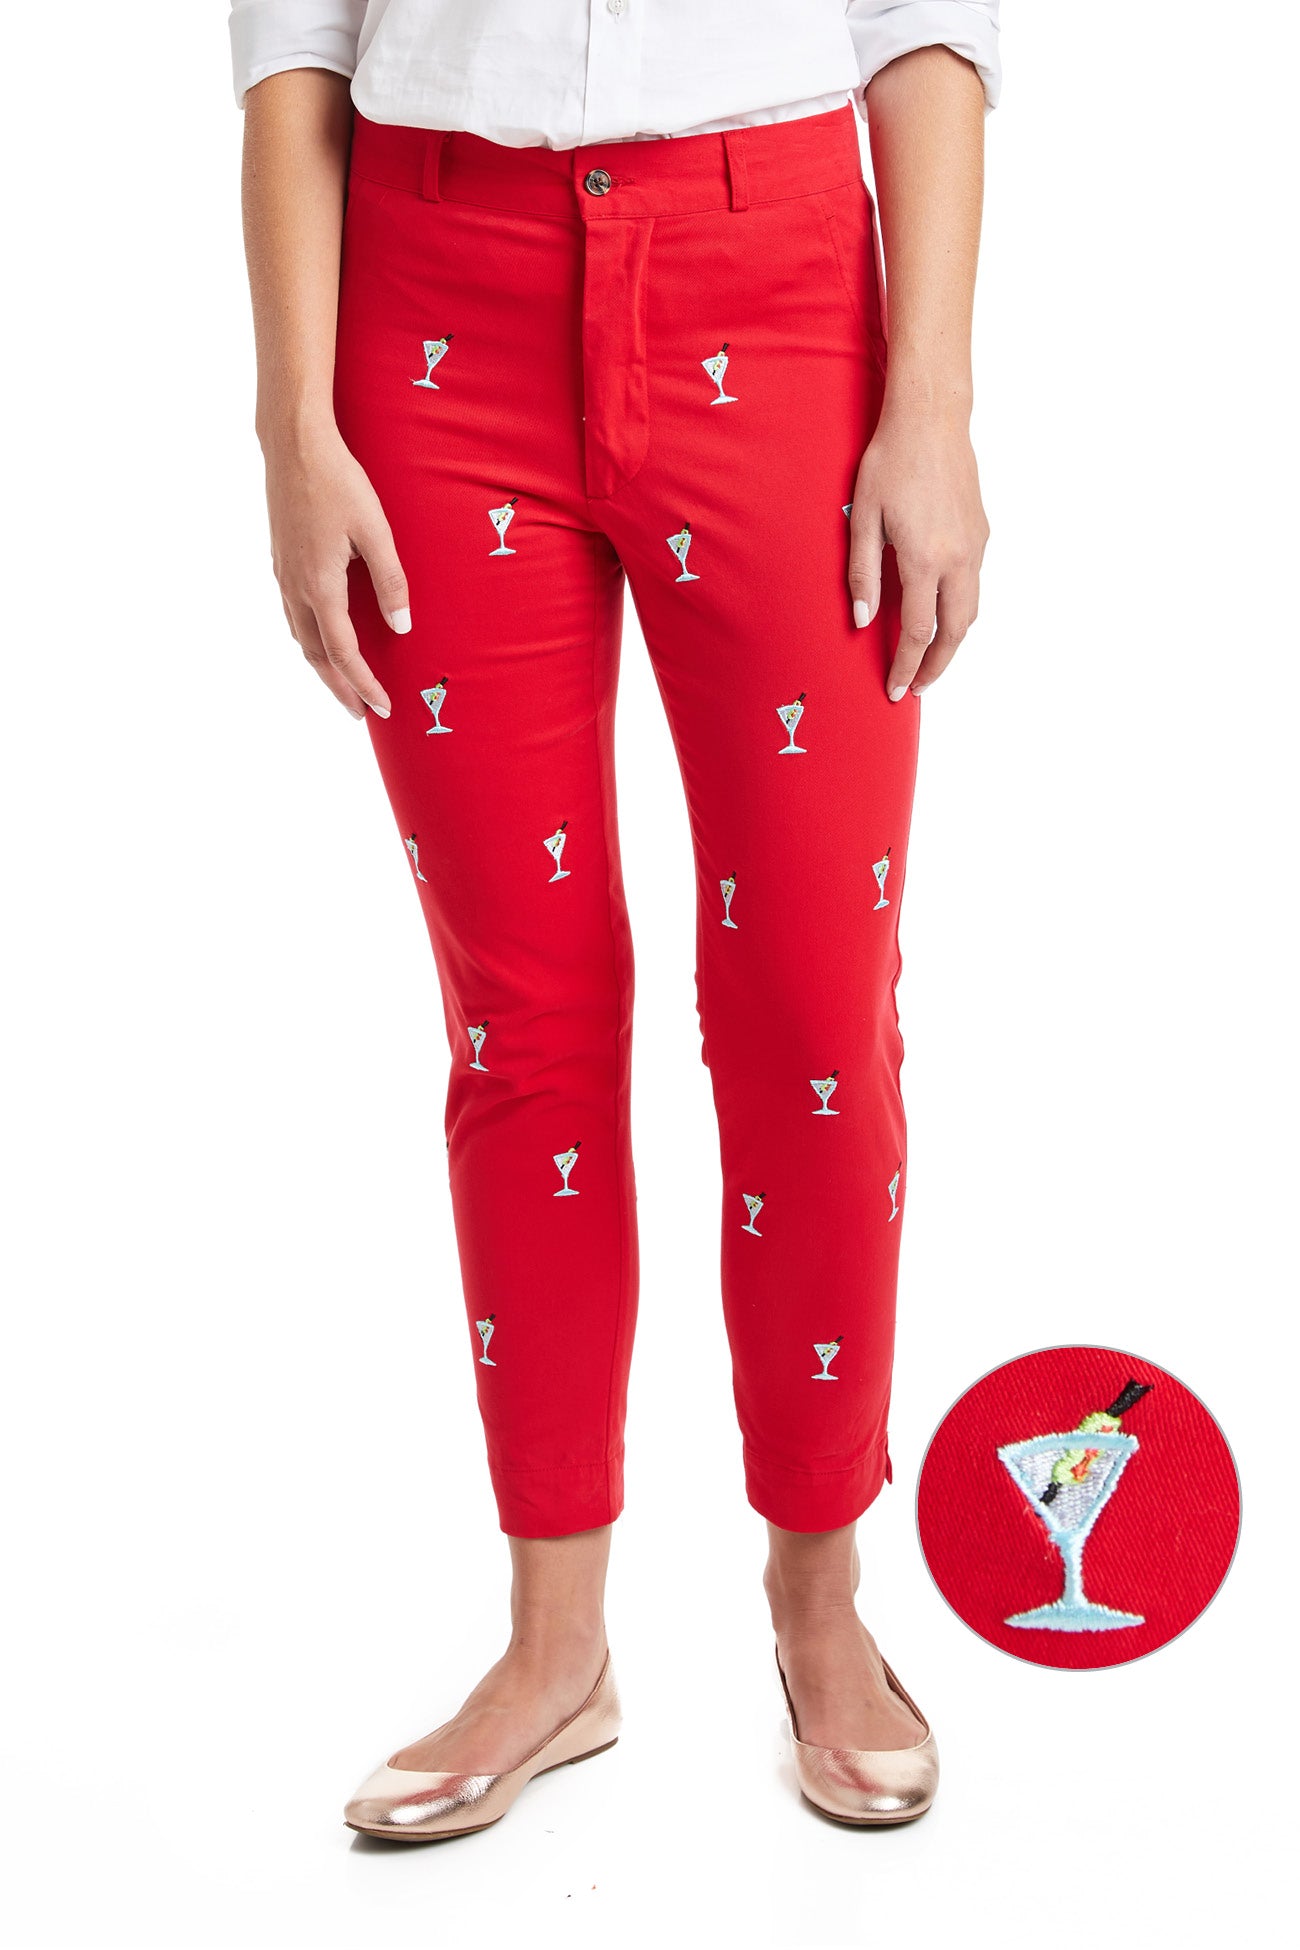 http://www.castawayclothing.com/cdn/shop/products/ankle-capri-stretch-twill-bright-red-with-martini-castaway-nantucket-island-ladies-pant-29591730290775.jpg?v=1665317411